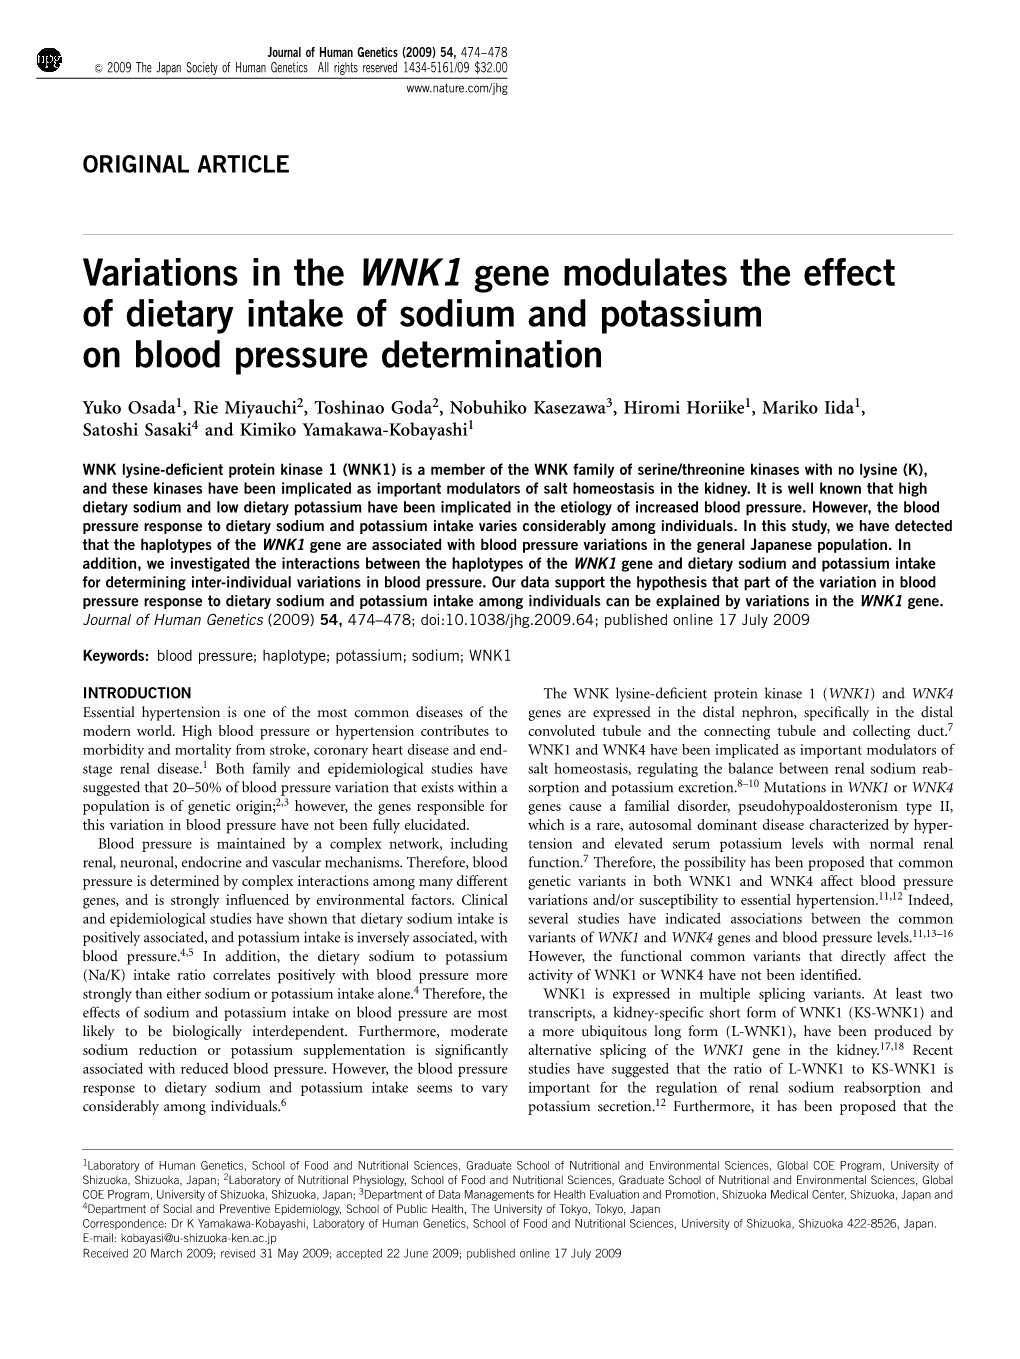 Variations in the WNK1 Gene Modulates the Effect of Dietary Intake of Sodium and Potassium on Blood Pressure Determination